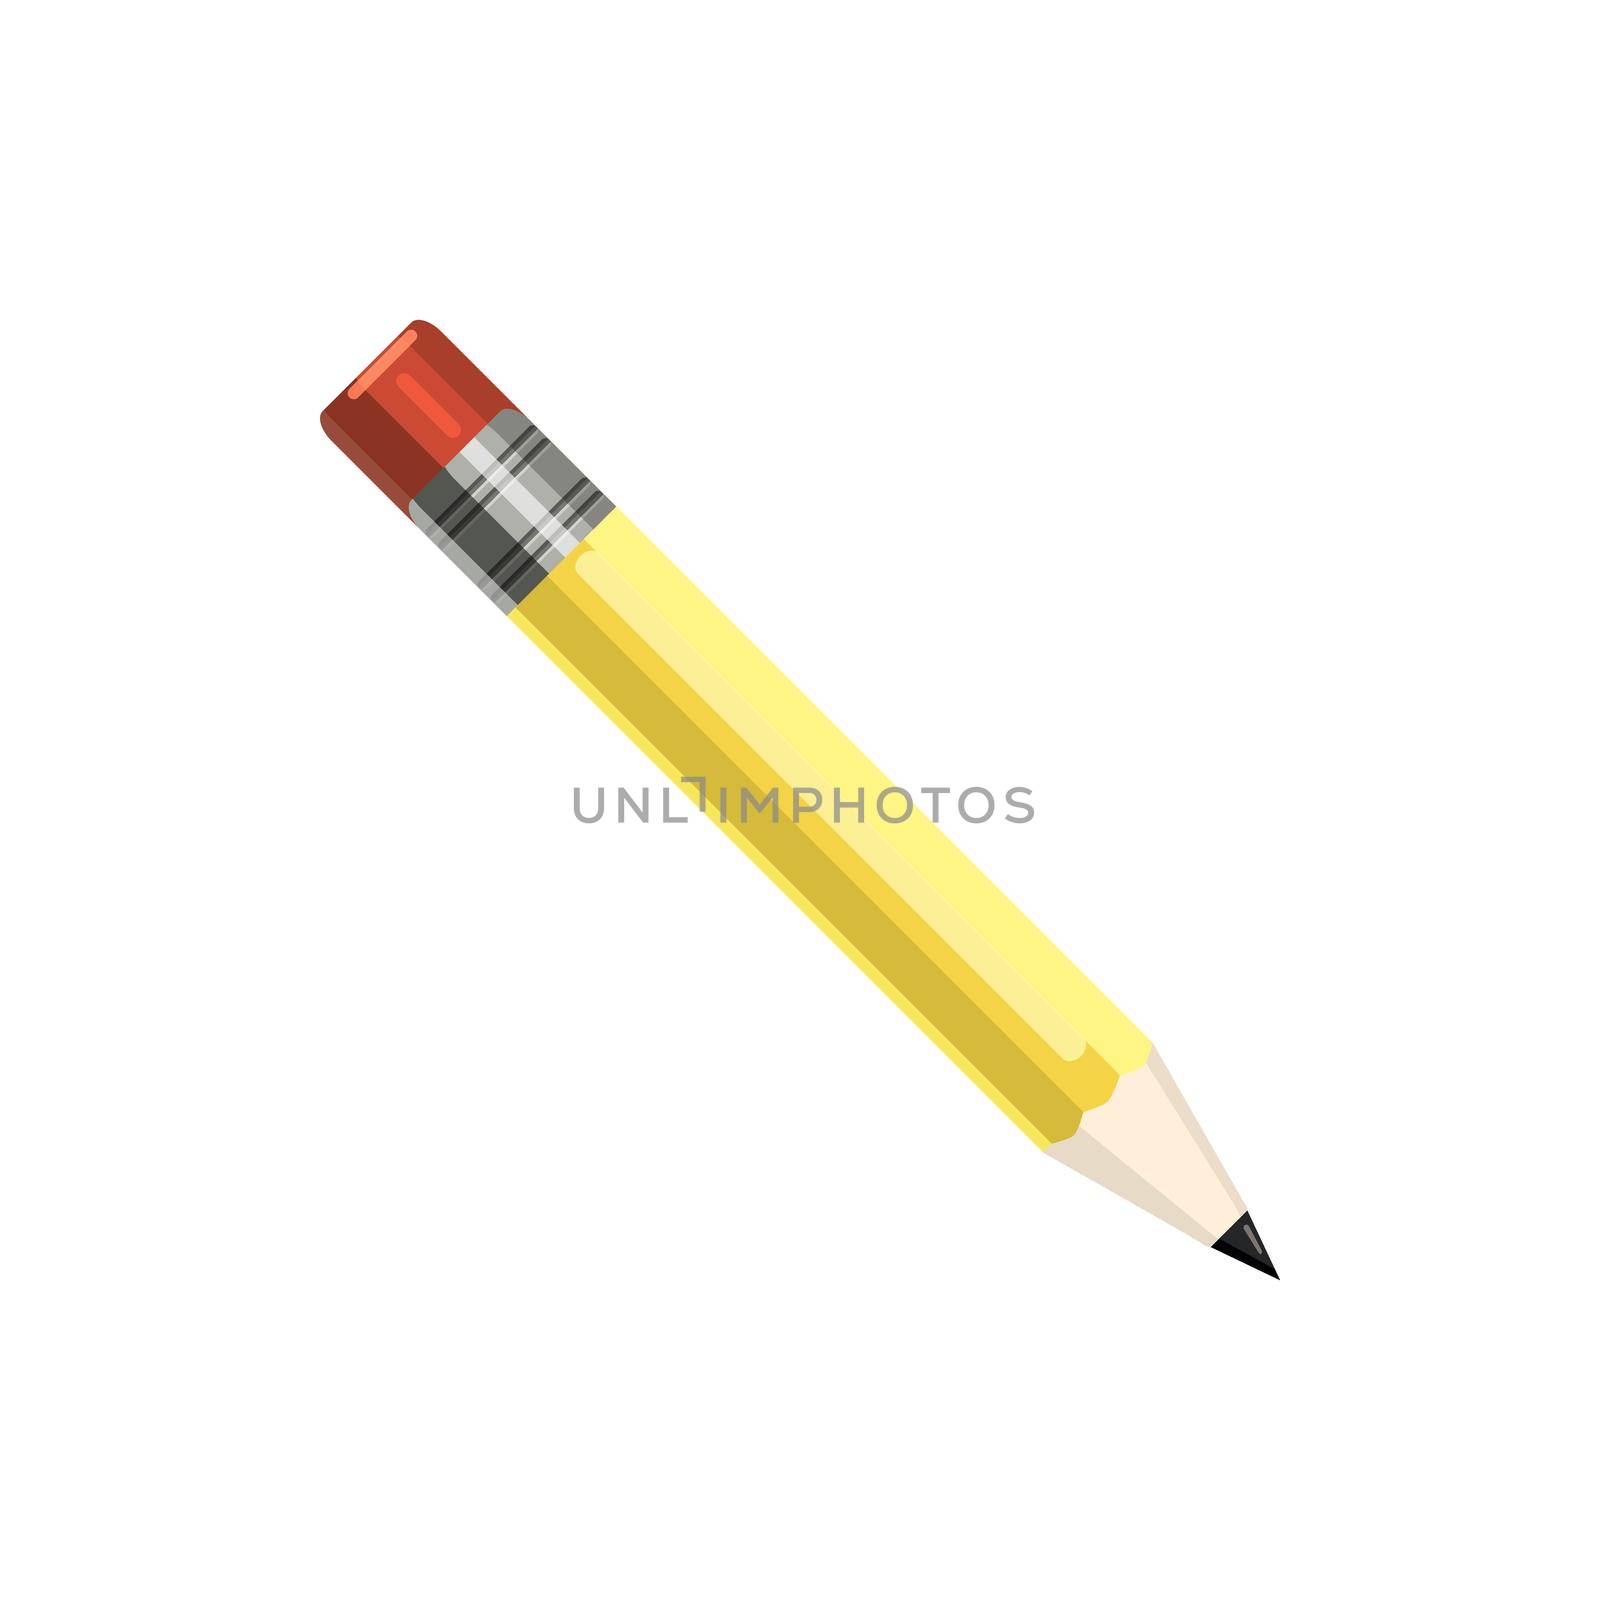 Pencil icon in cartoon style on a white background